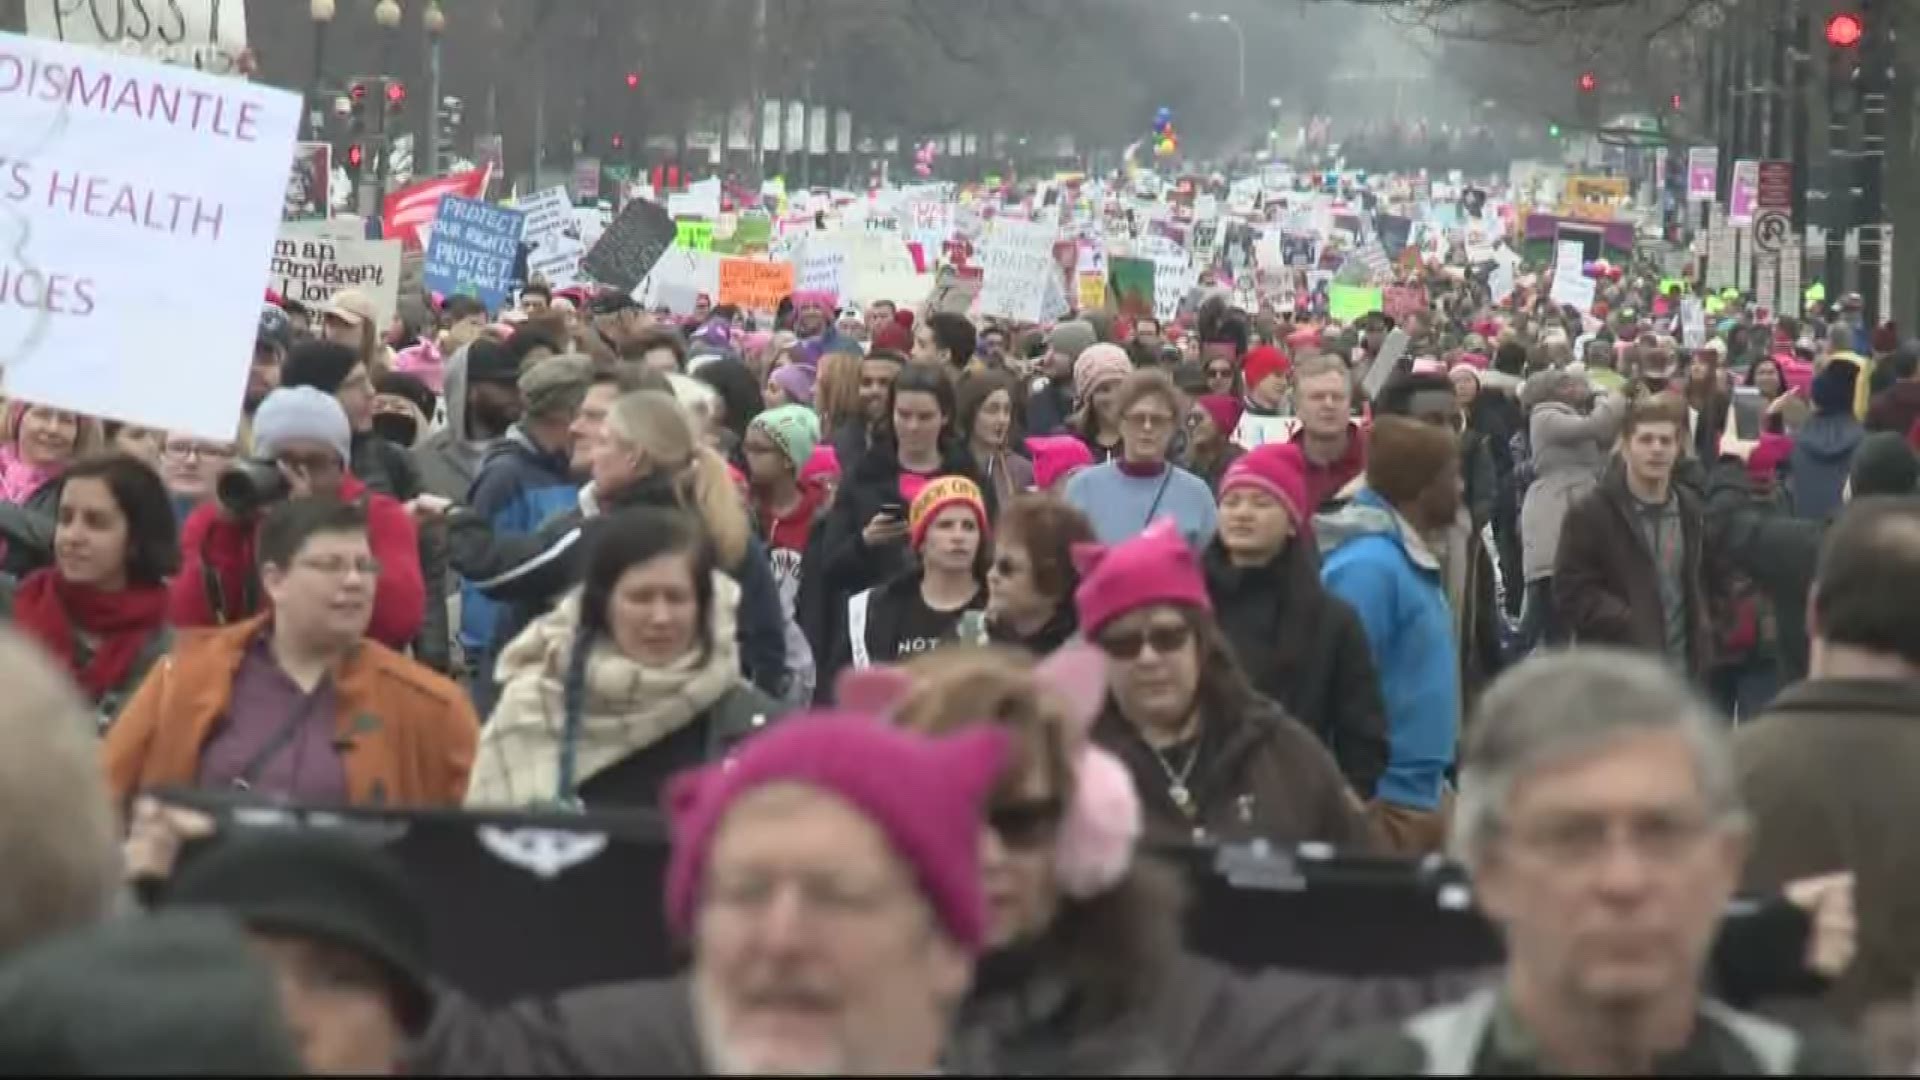 From millions to tens of thousands- why some DC residents say they're staying away from the Women's March this year.